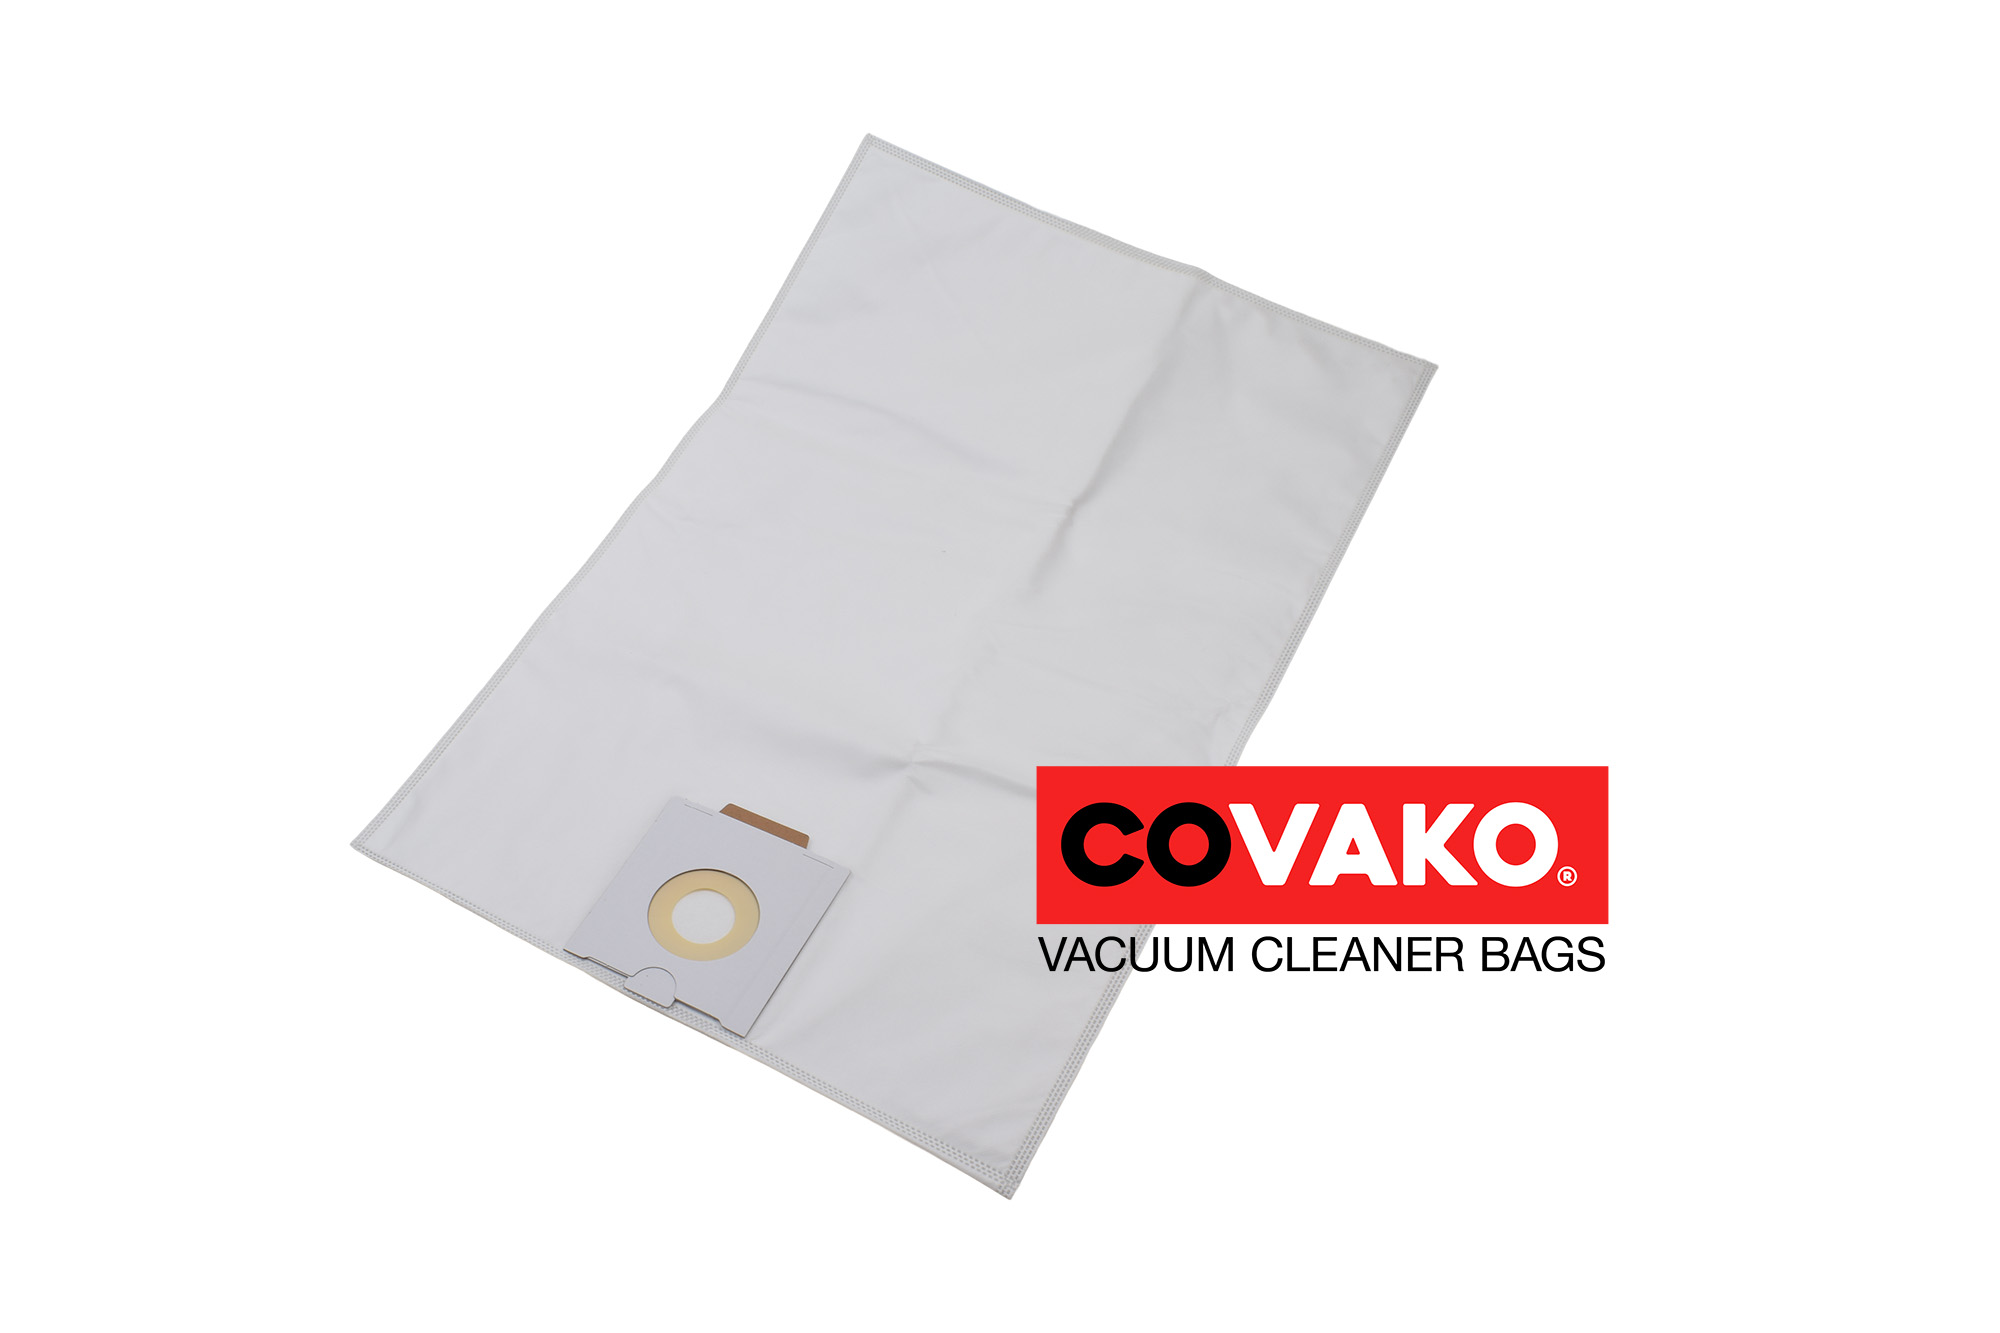 Protool VCP 480 / Synthesis - Protool vacuum cleaner bags